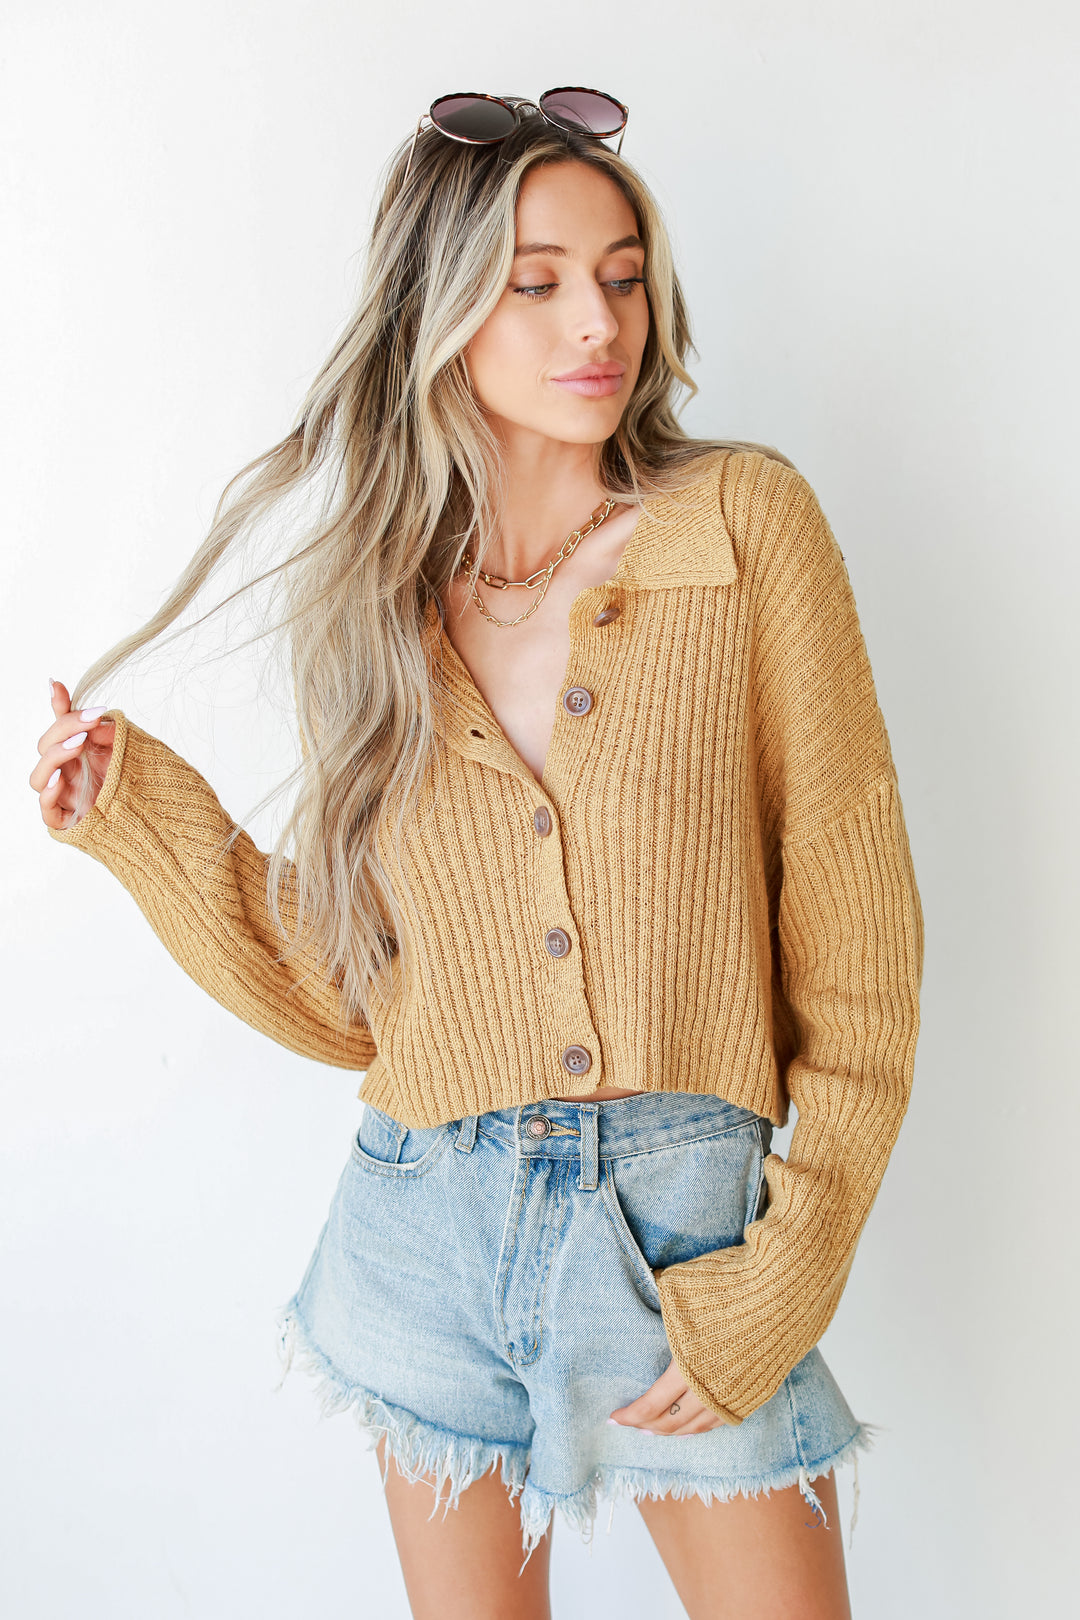 Cropped Sweater from dress up